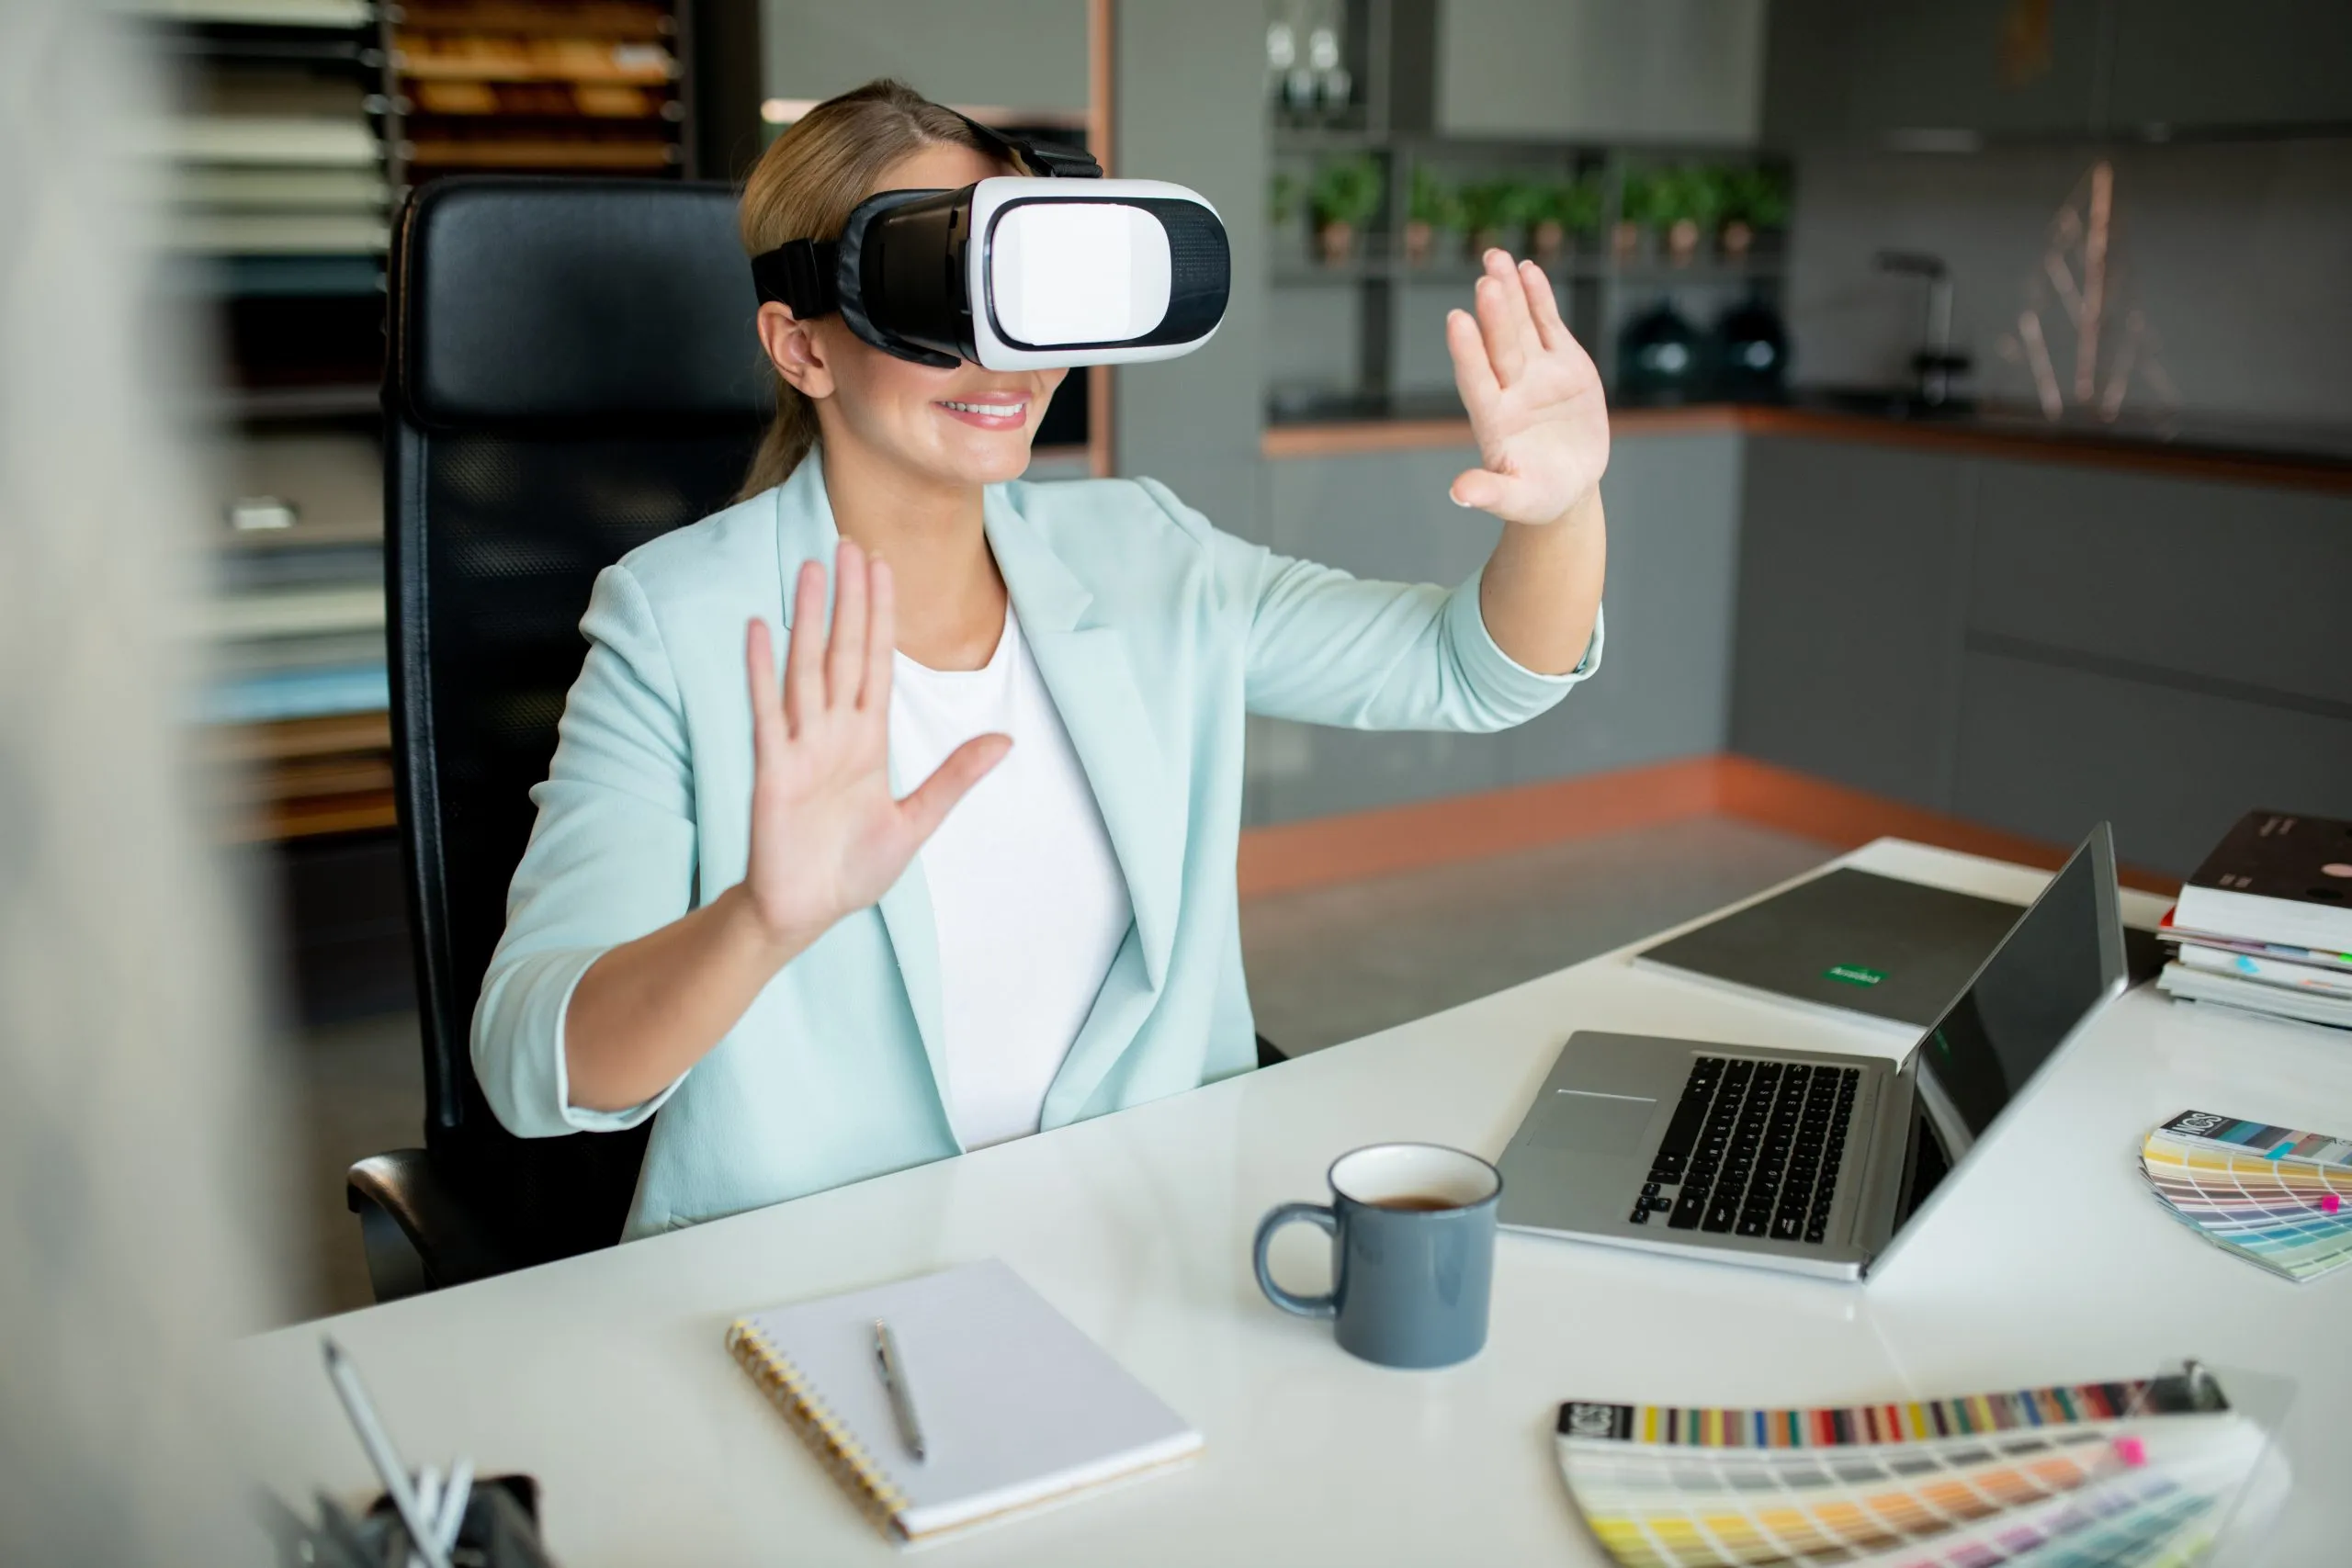 4. VR Personalizes the Training Experience